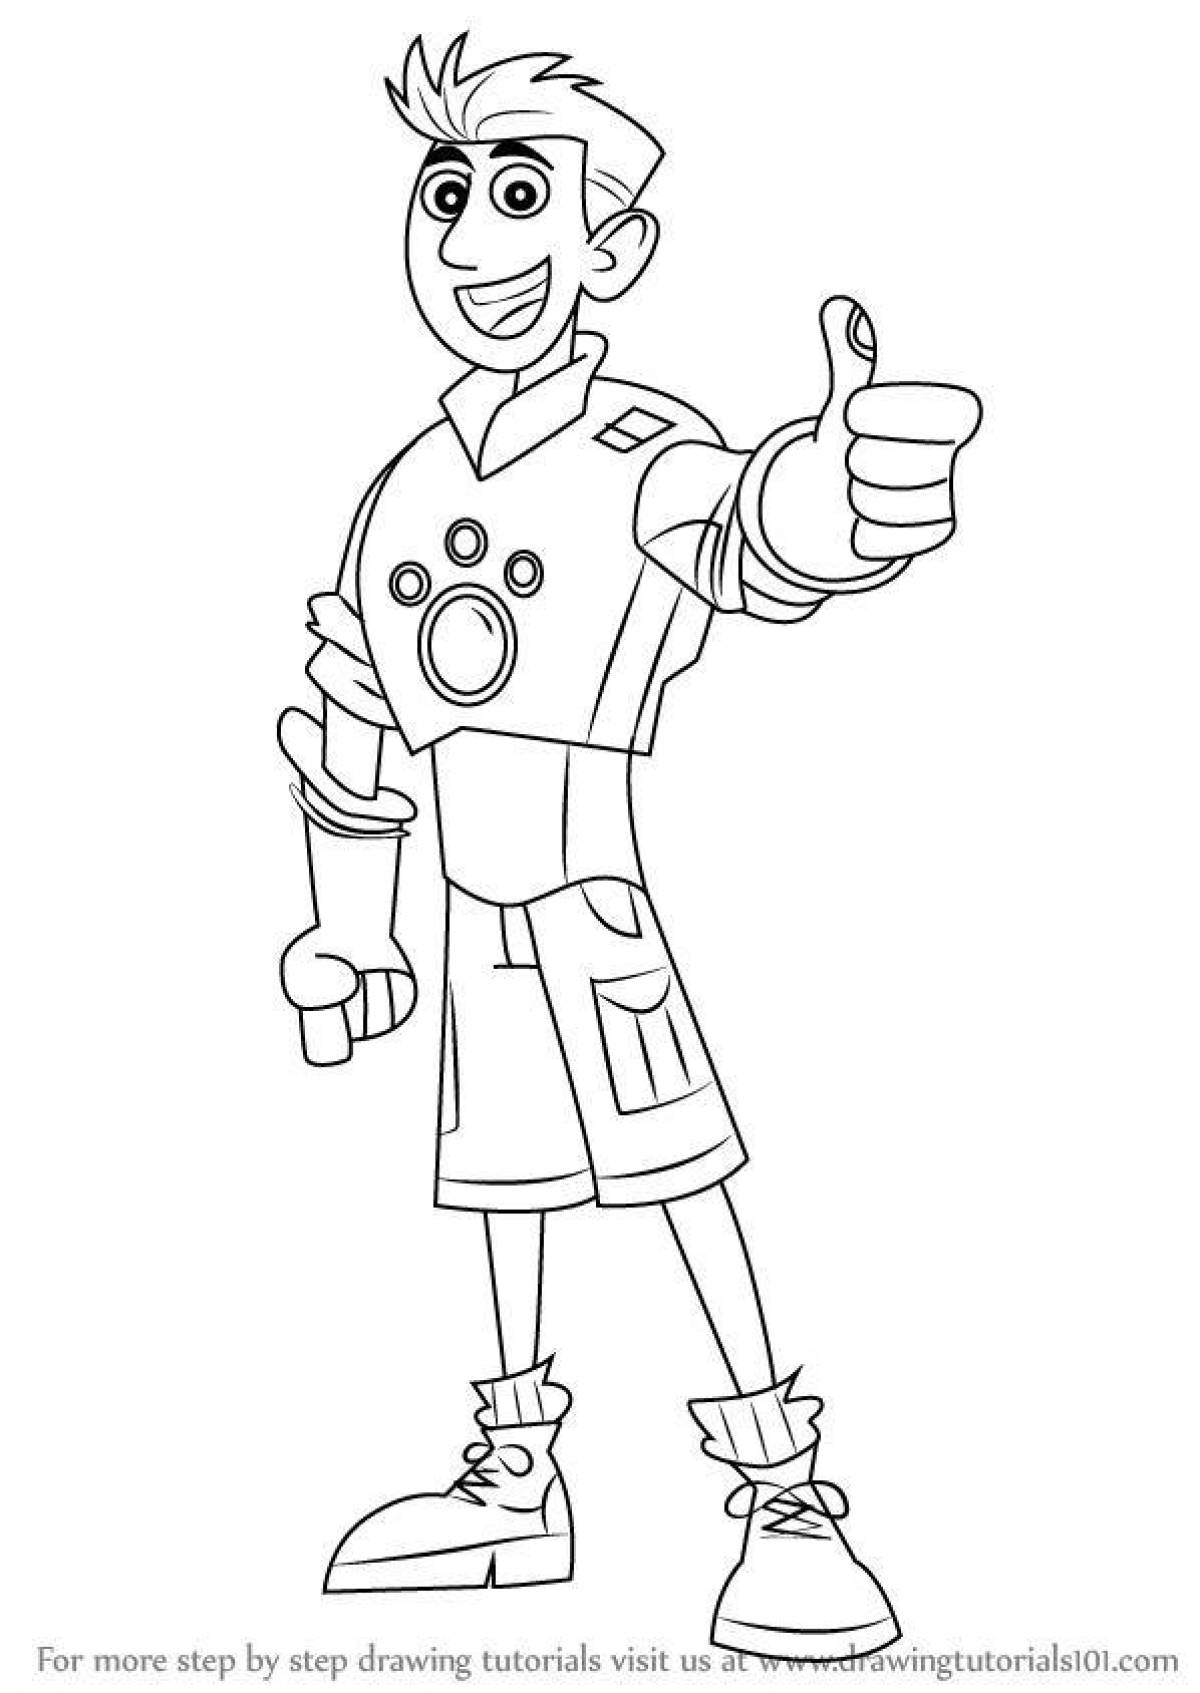 The kratt brothers playful coloring page